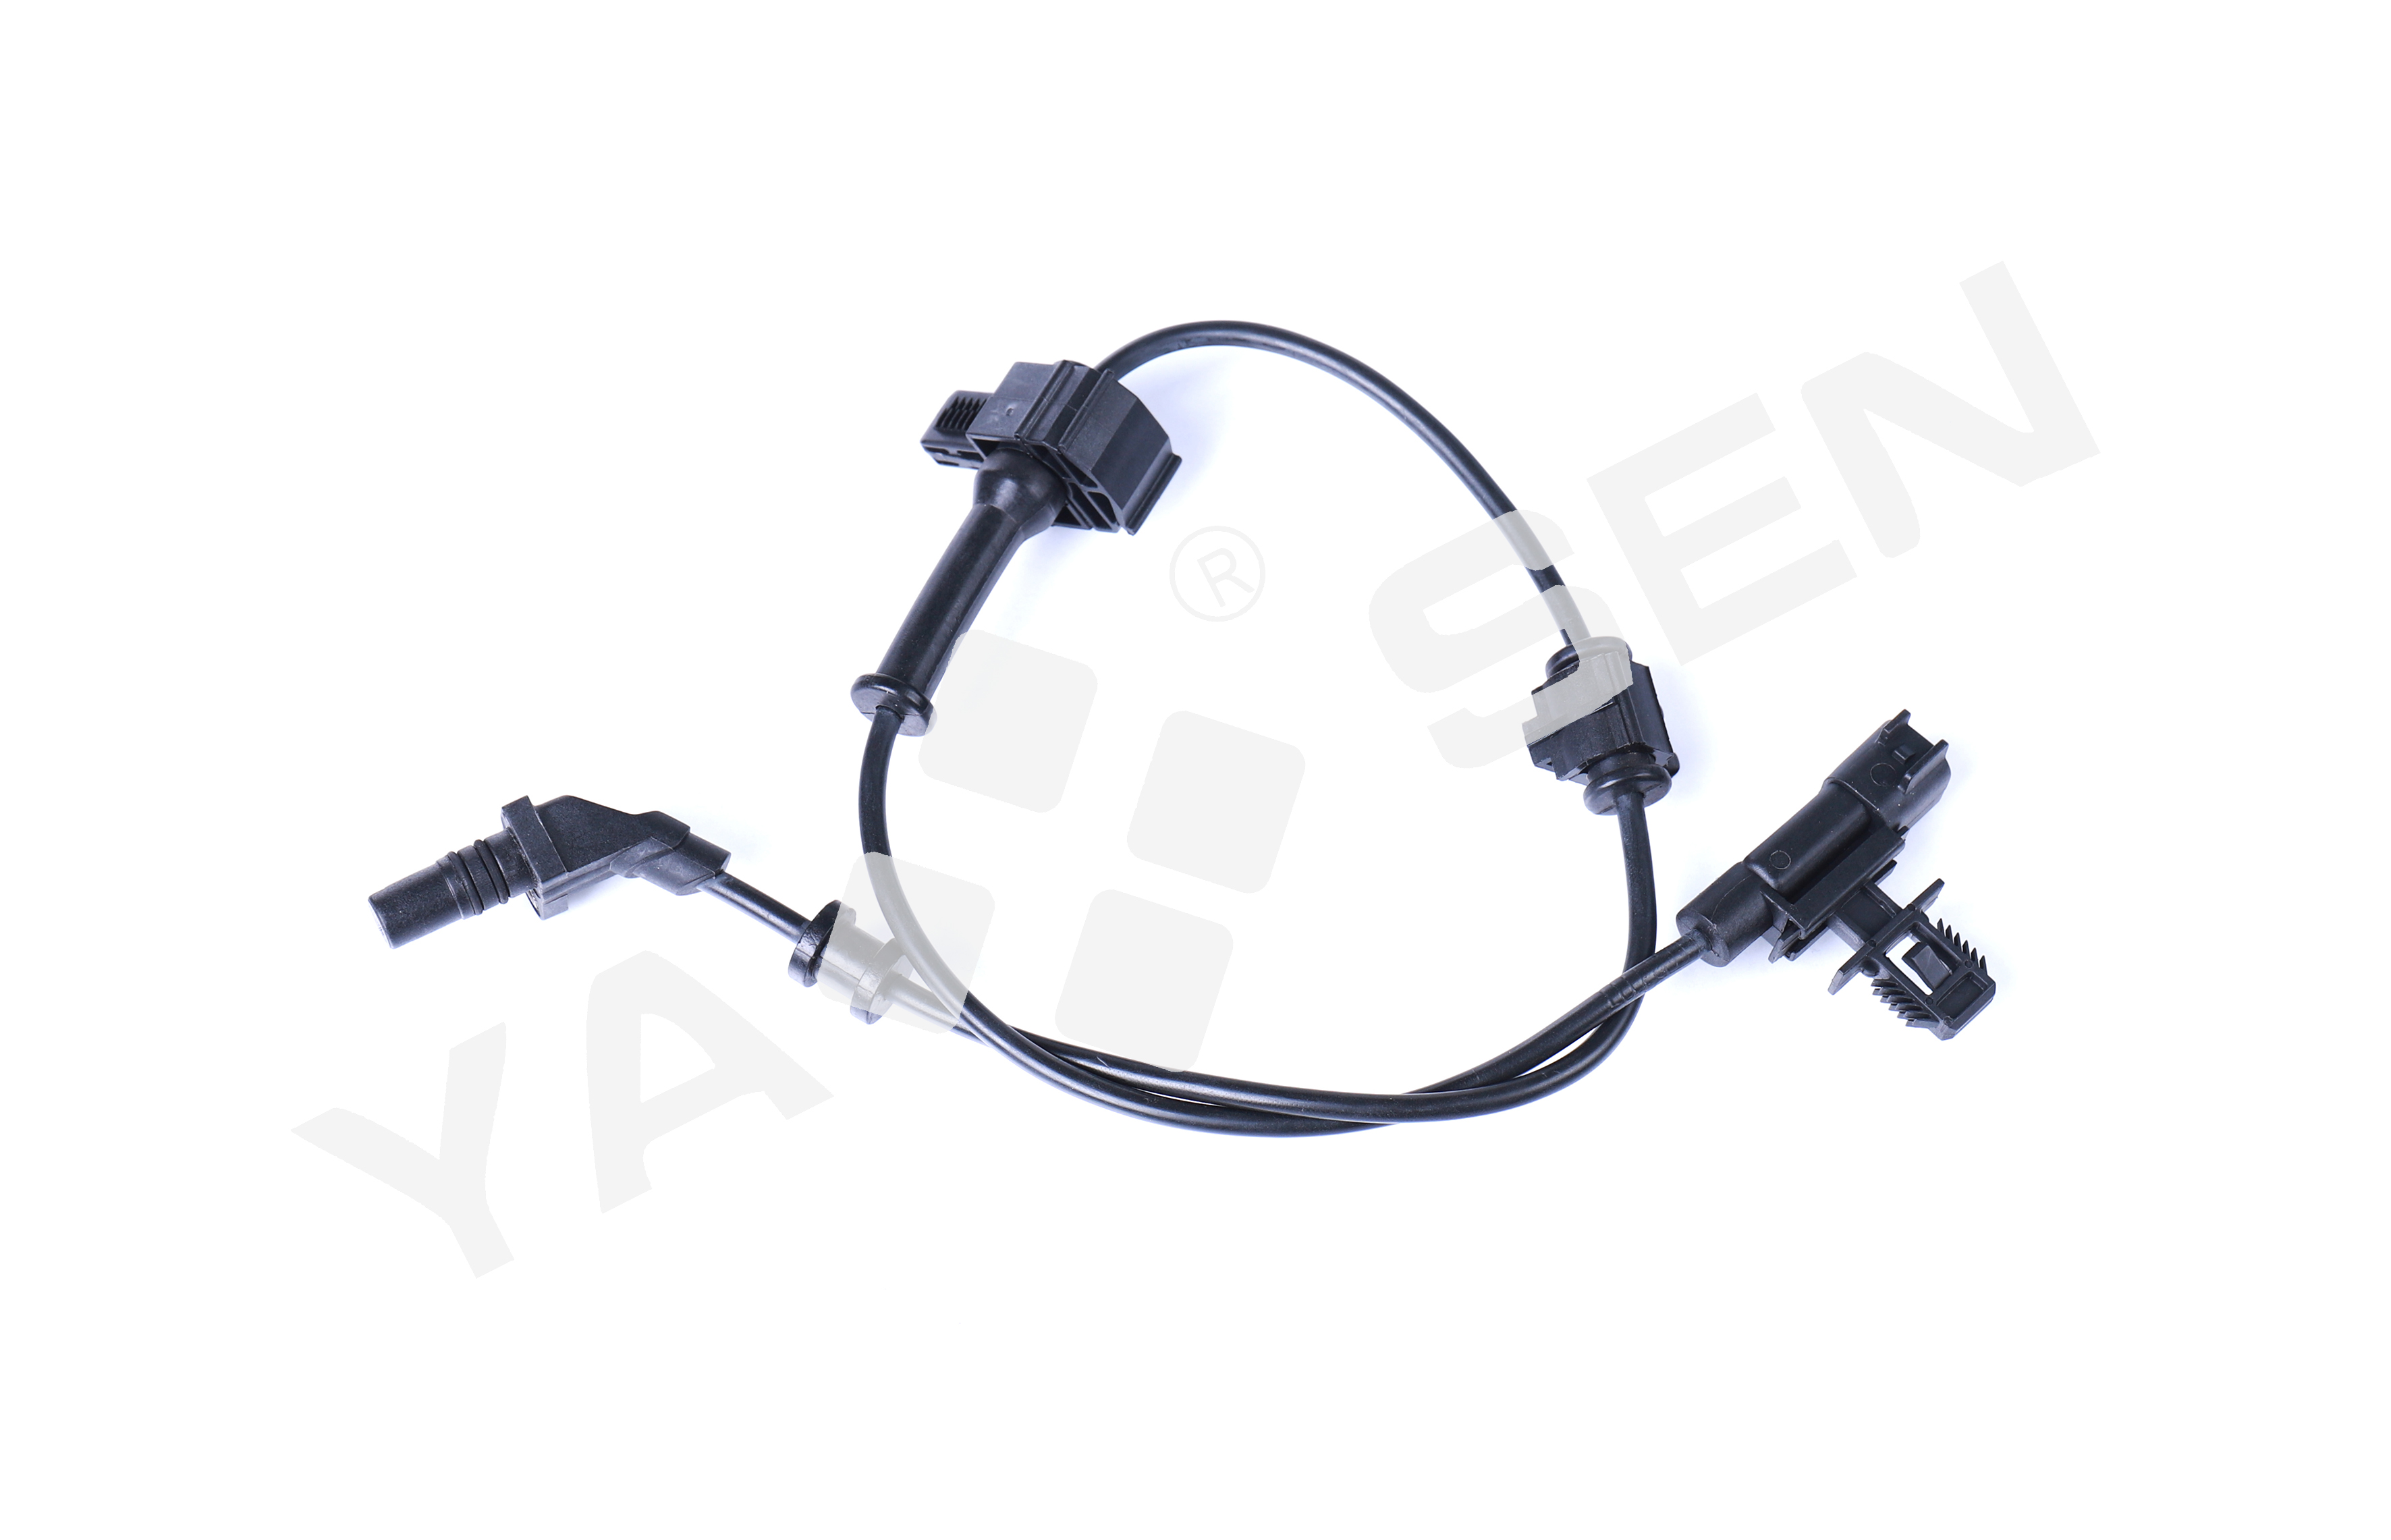 ABS Wheel Speed Sensor for FORD/DODGE SU14305 1802-559030 72-11070 5S12892 ABS2293 20872161